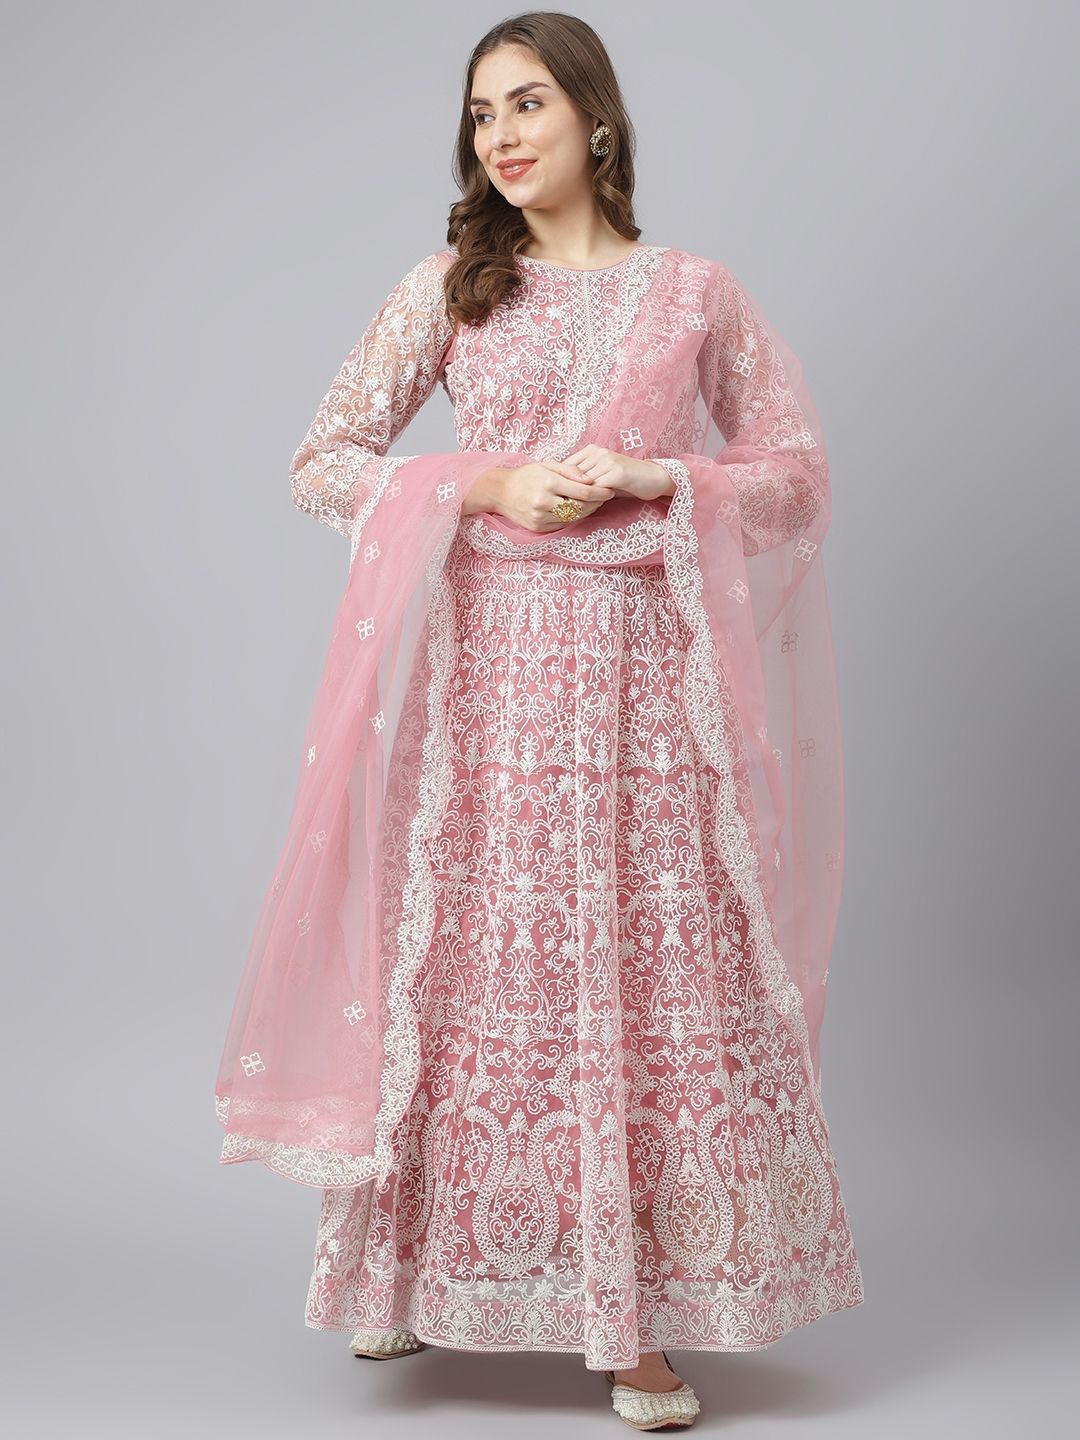 Readiprint Fashions Women Pink & White Embroidered Semi-Stitched Dress Material Price in India